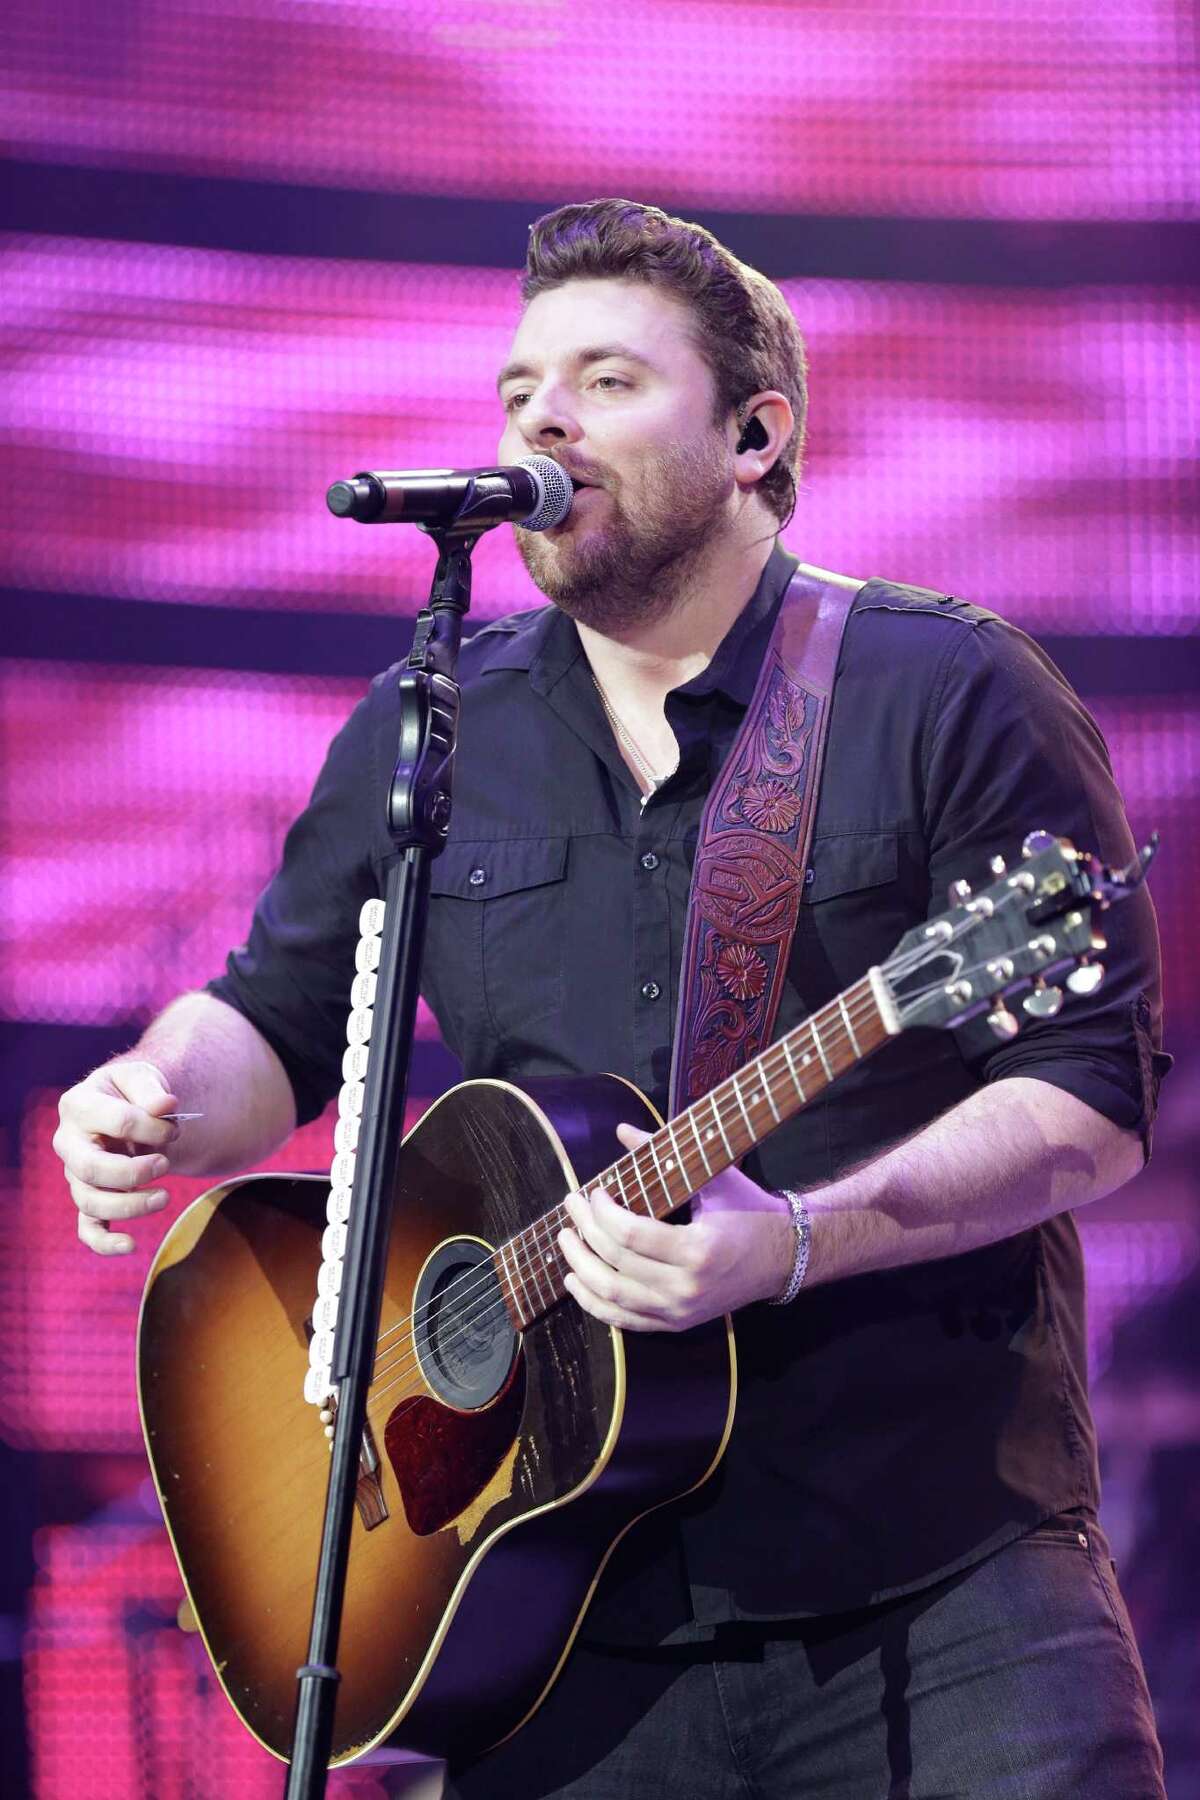 Chris Young performs at the Houston Livestock Show and Rodeo on Wednesday.